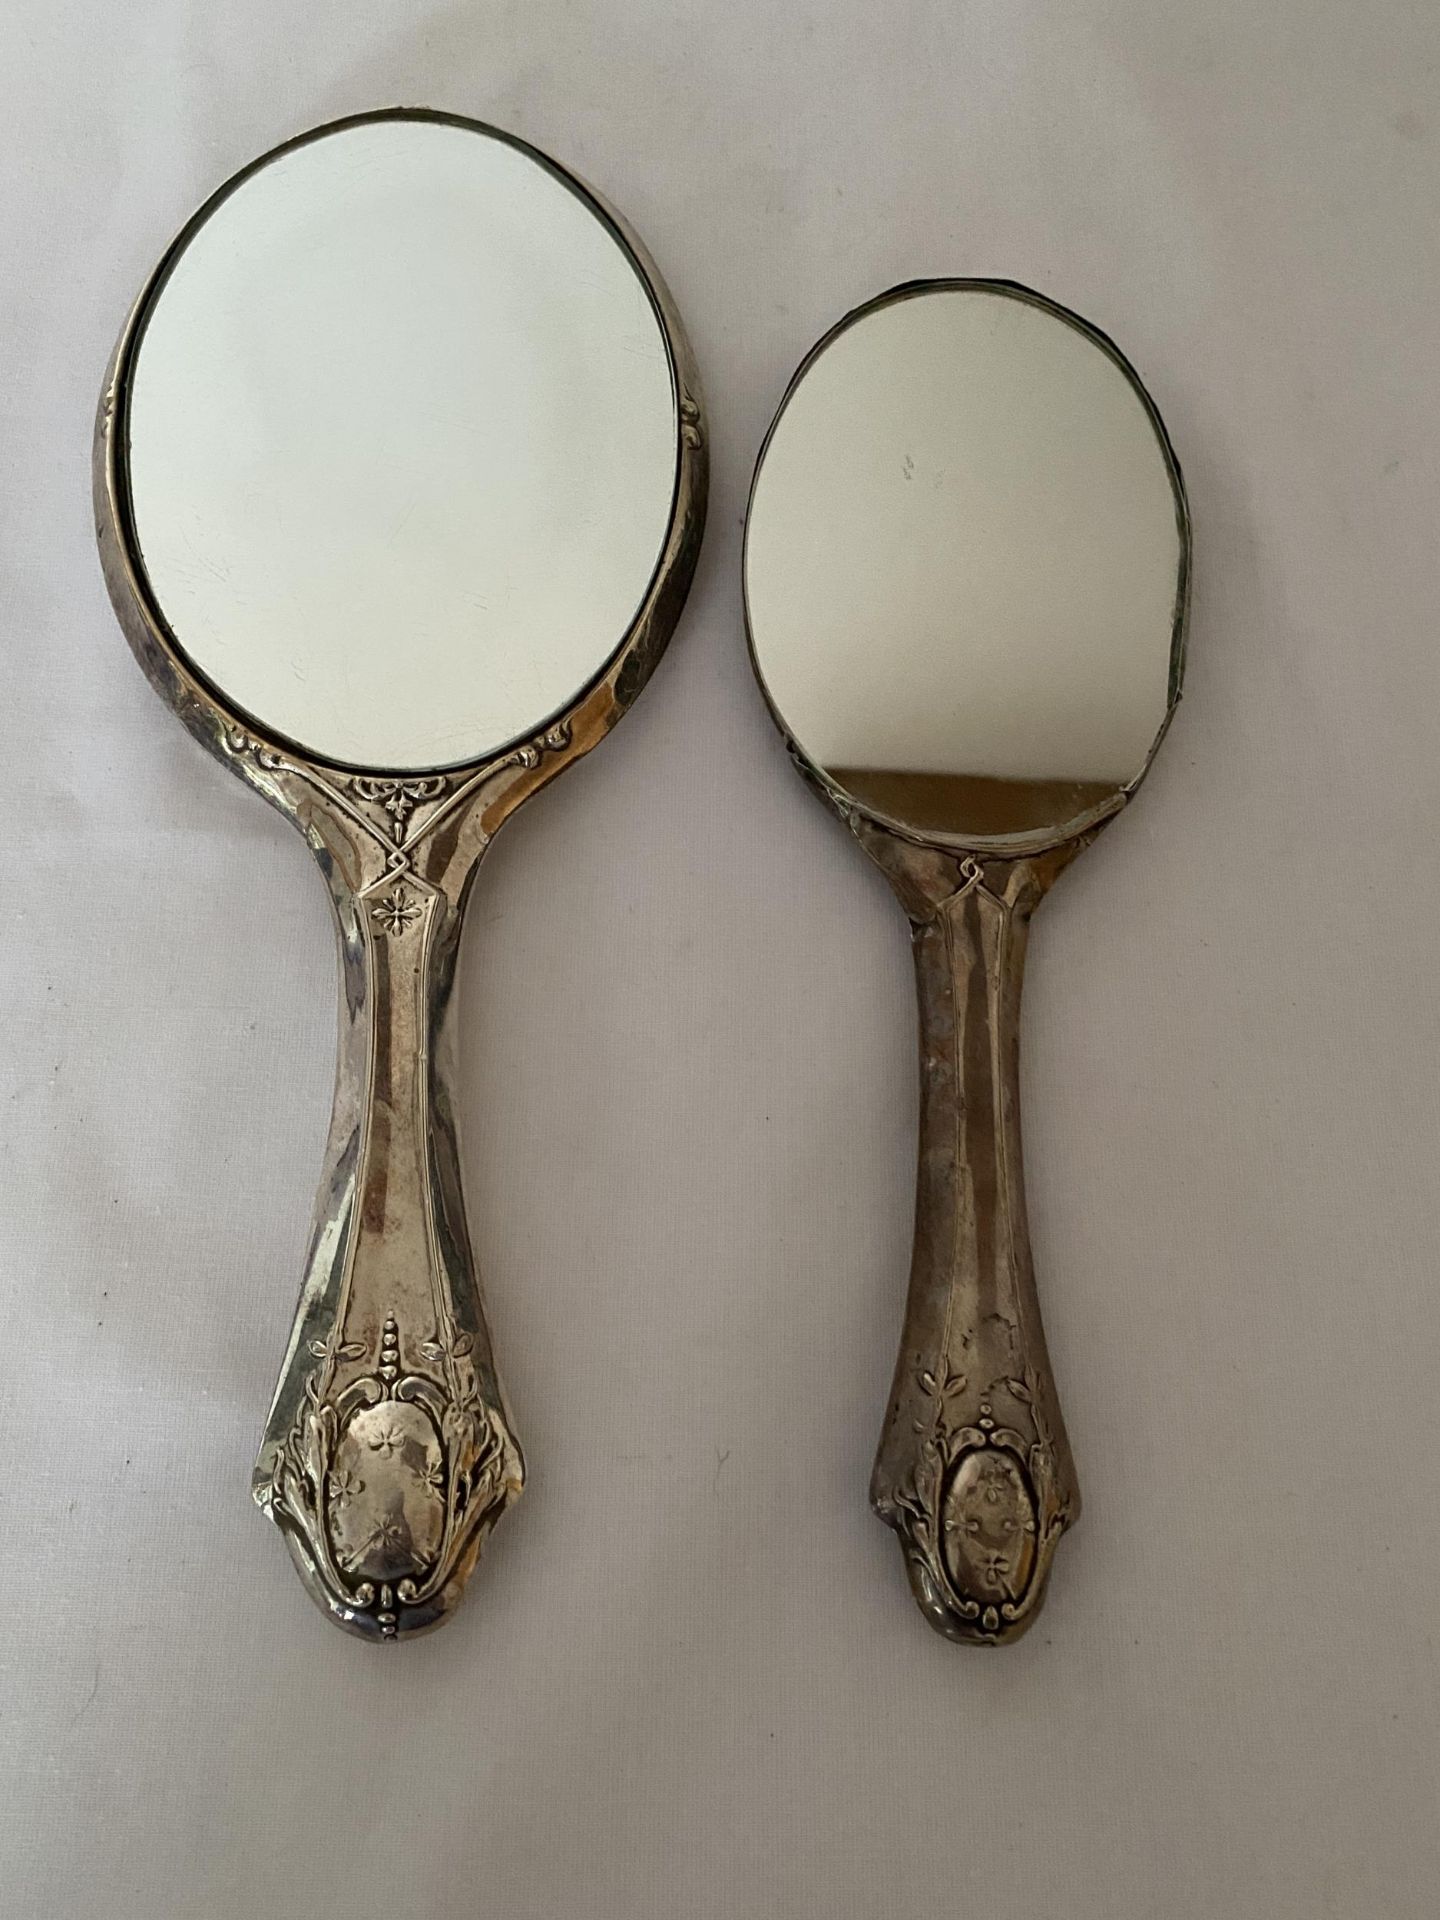 TWO HALLMARKED BIRMINGHAM SILVER BACKED HAND MIRRORS, EARLIEST DATING TO 1913 - Image 10 of 18